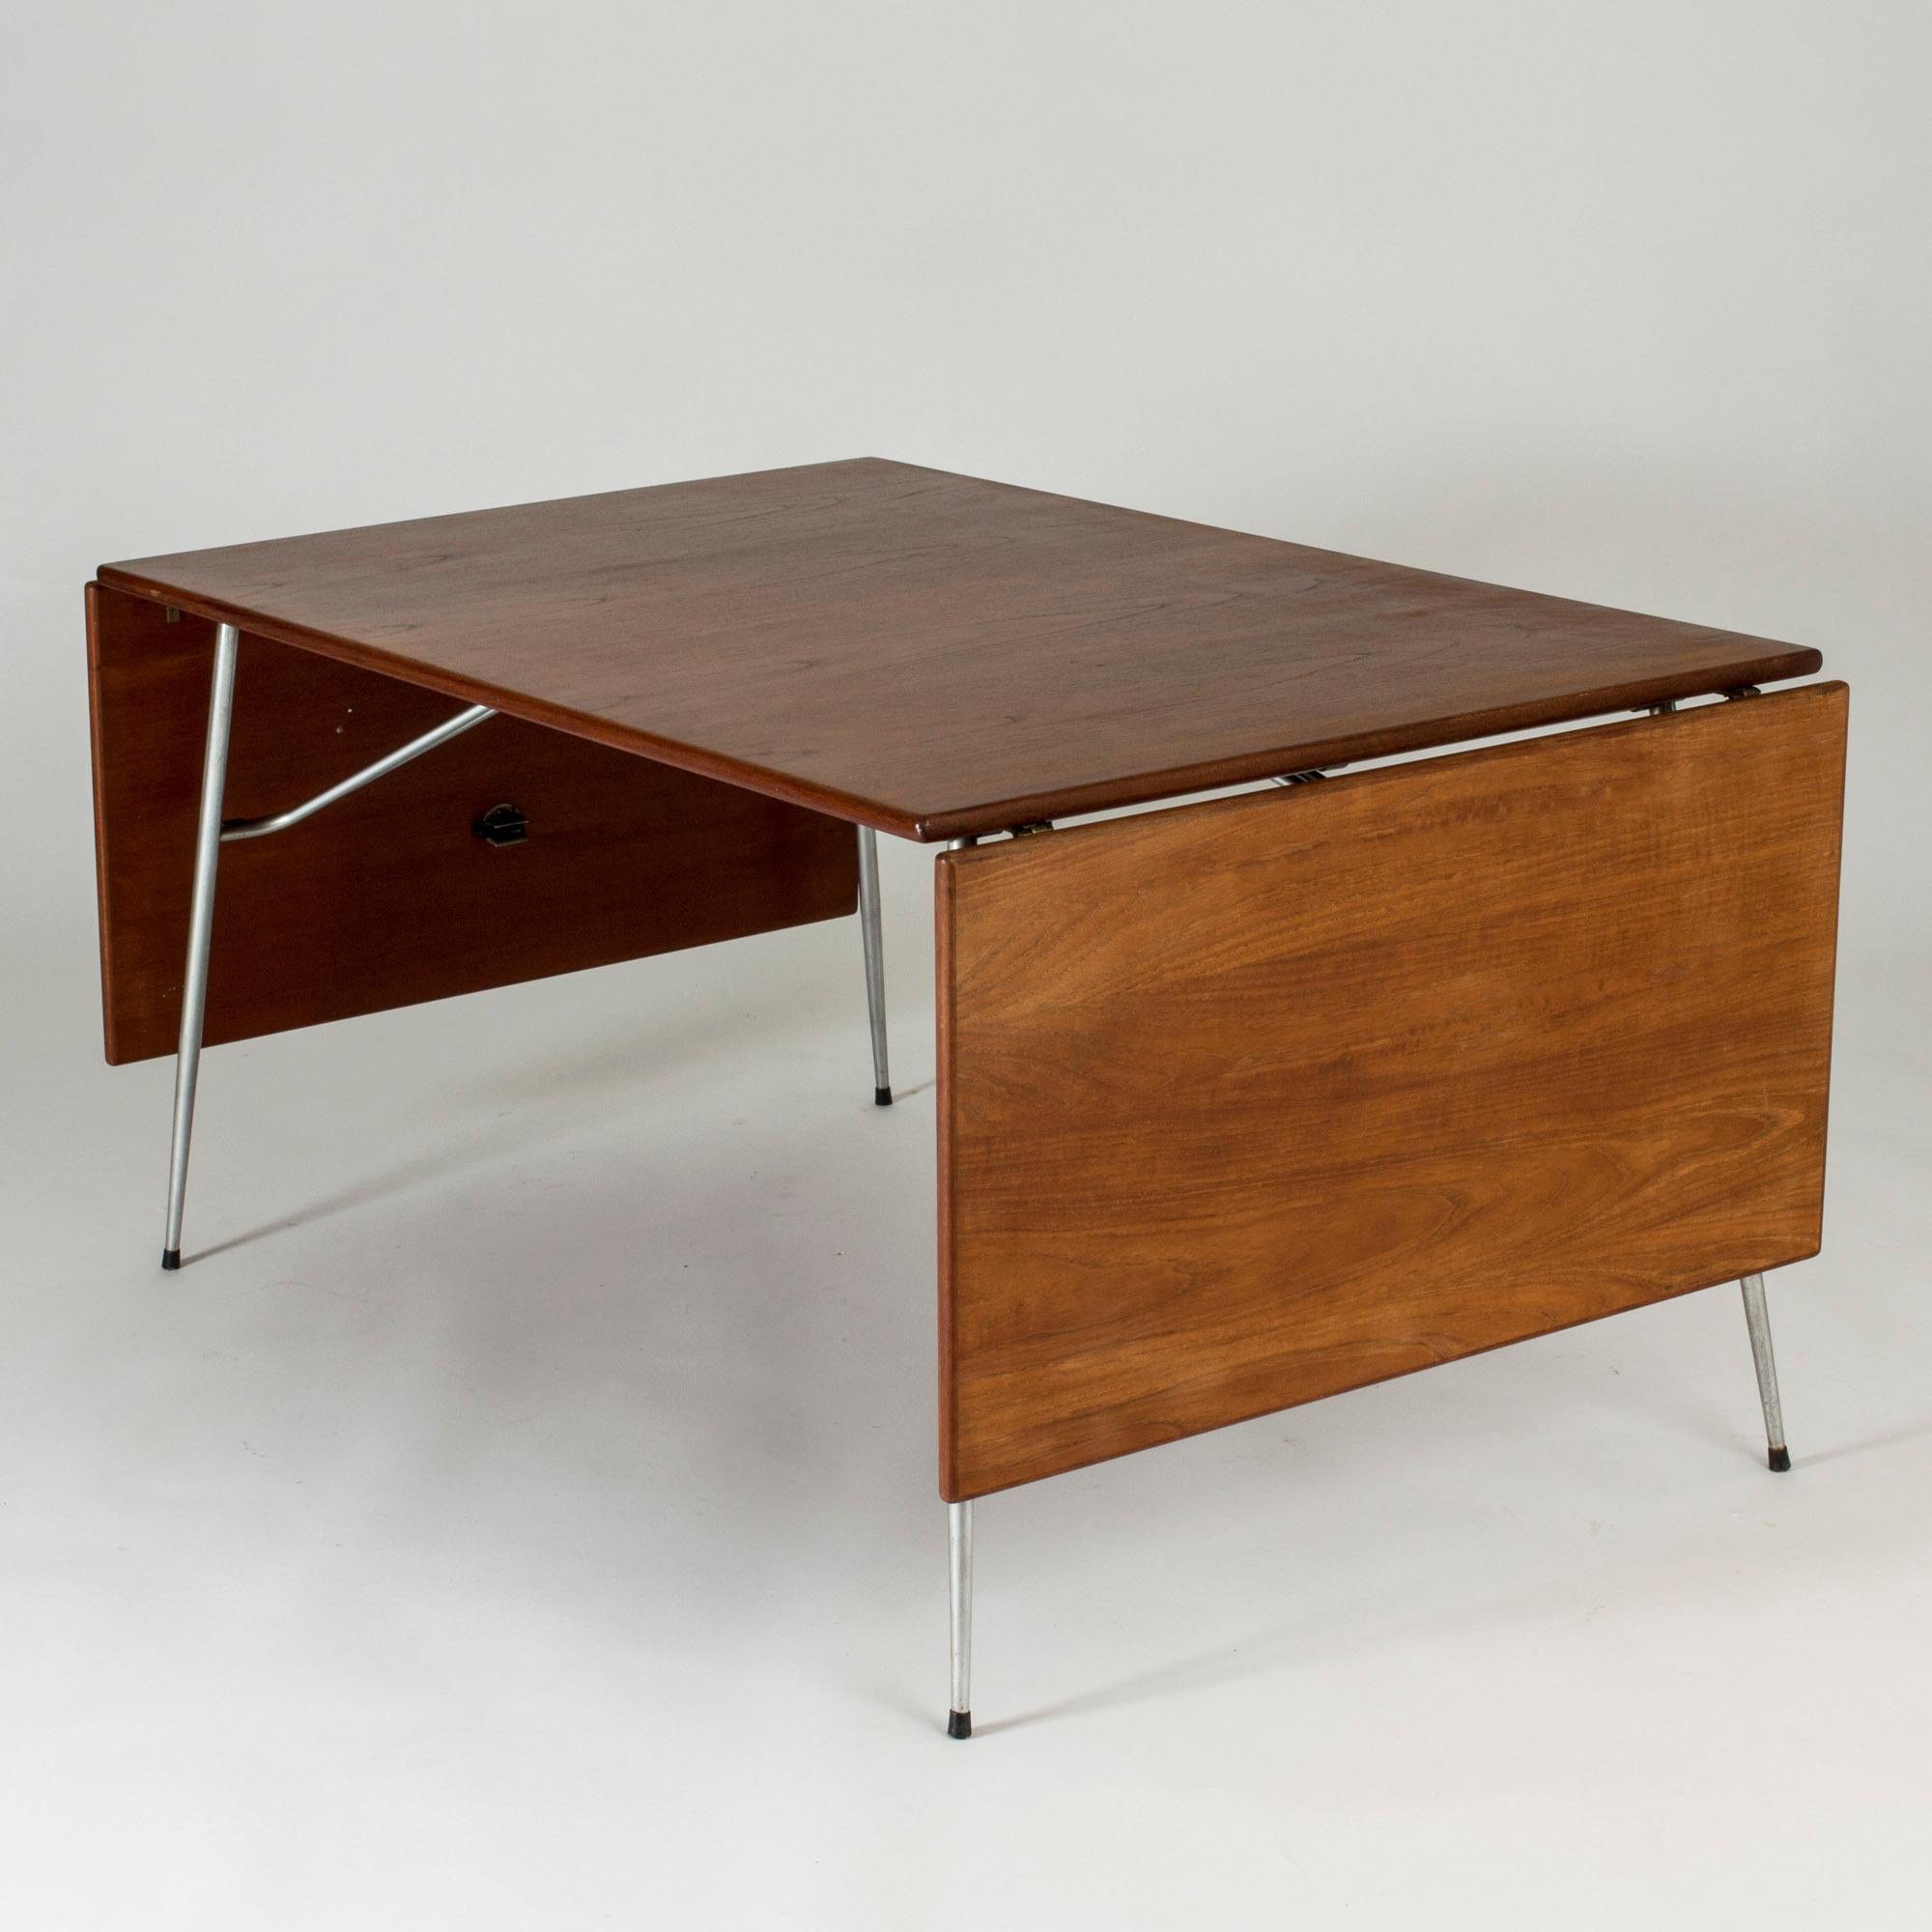 Teak dining table by Børge Mogensen, model 162, in a rare edition with steel legs. Elegant, light expression. Clever, decorative mechanism for folding out the leaves.